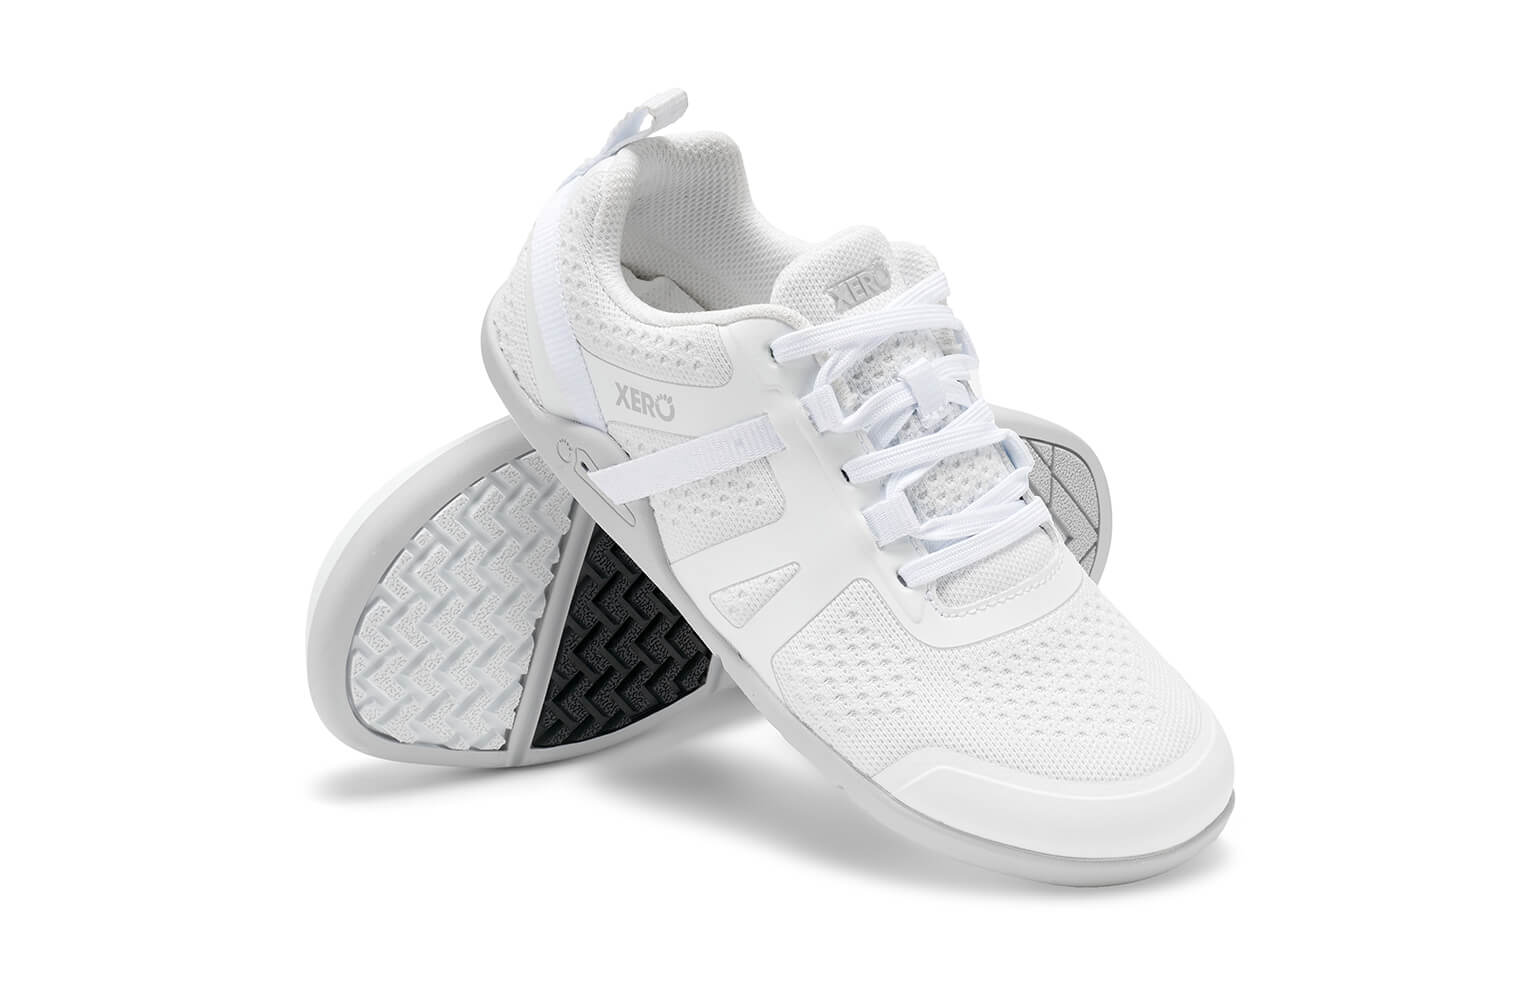 Adidas Neo Shoes (comfort footbed) - Size 5.5 | Adidas neo shoes,  Comfortable shoes, Adidas